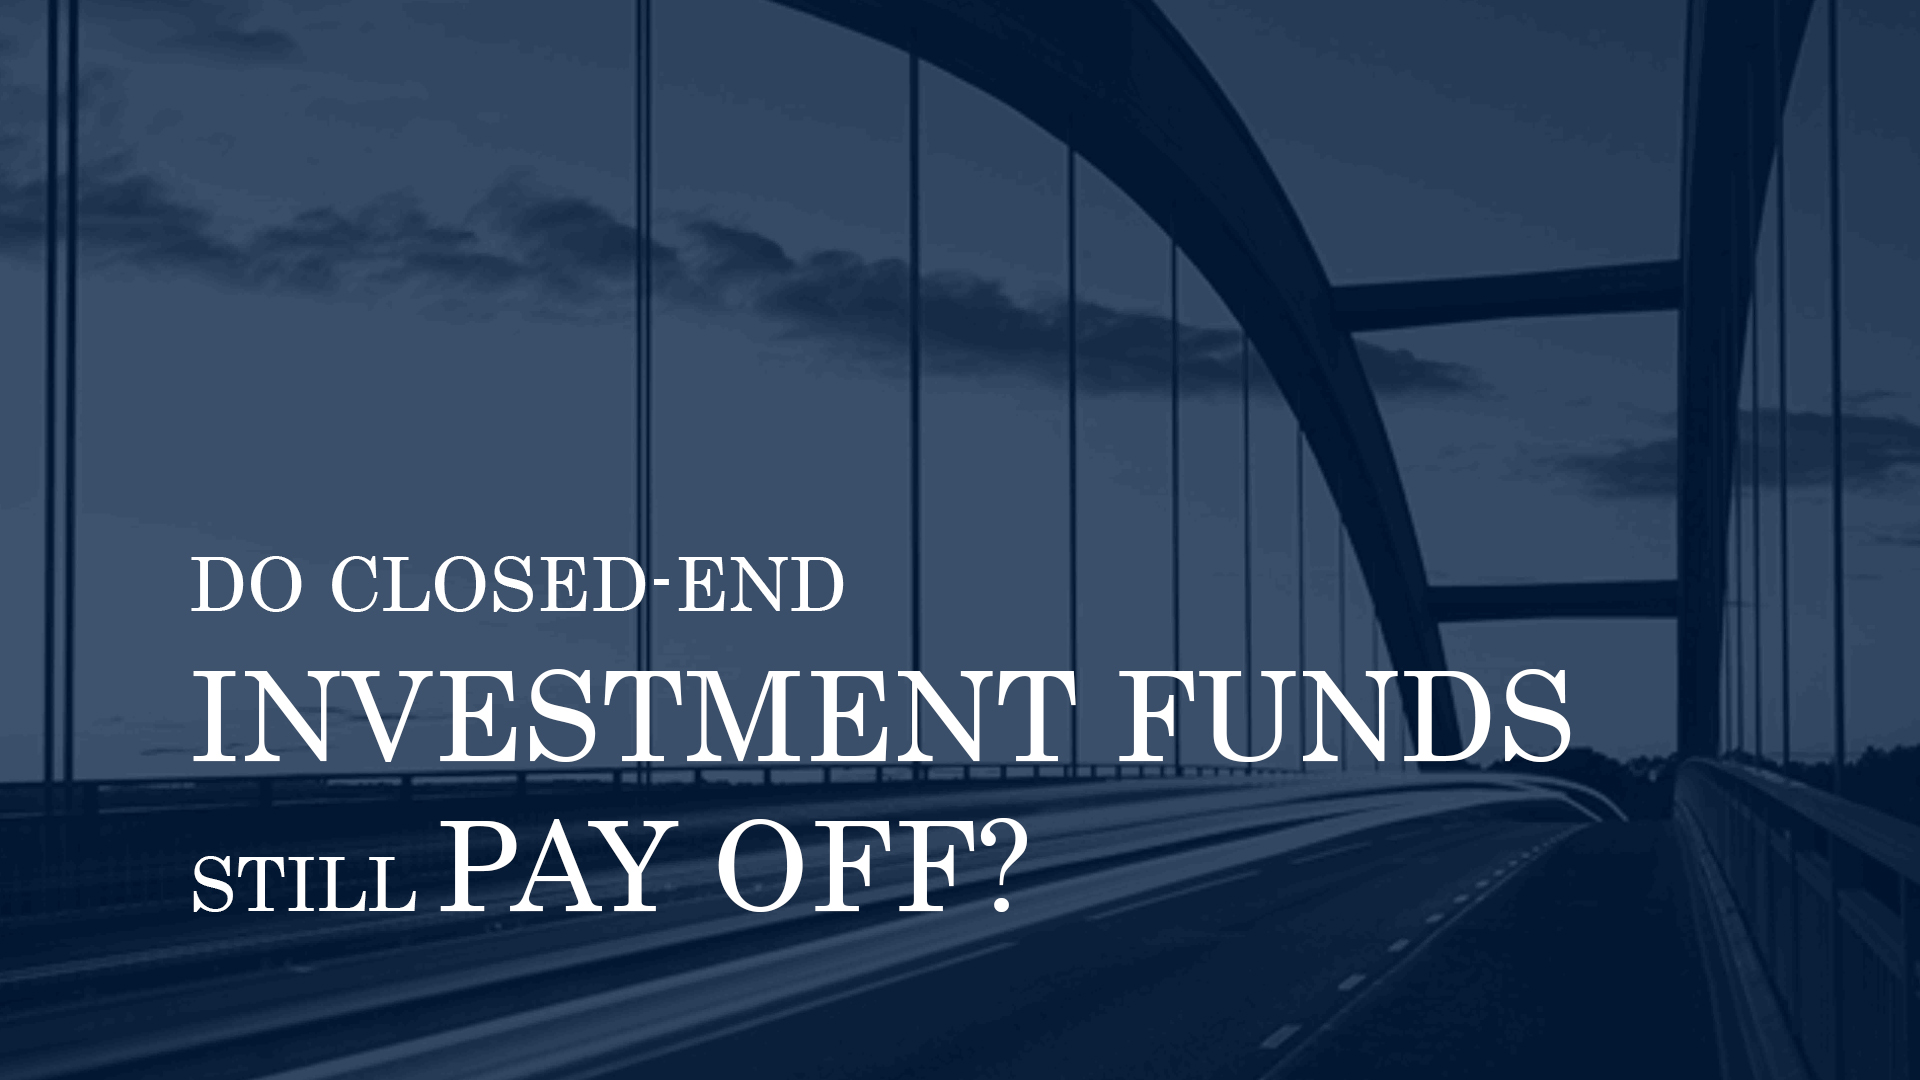 DO CLOSED-END INVESTMENT FUNDS STILL PAY OFF?